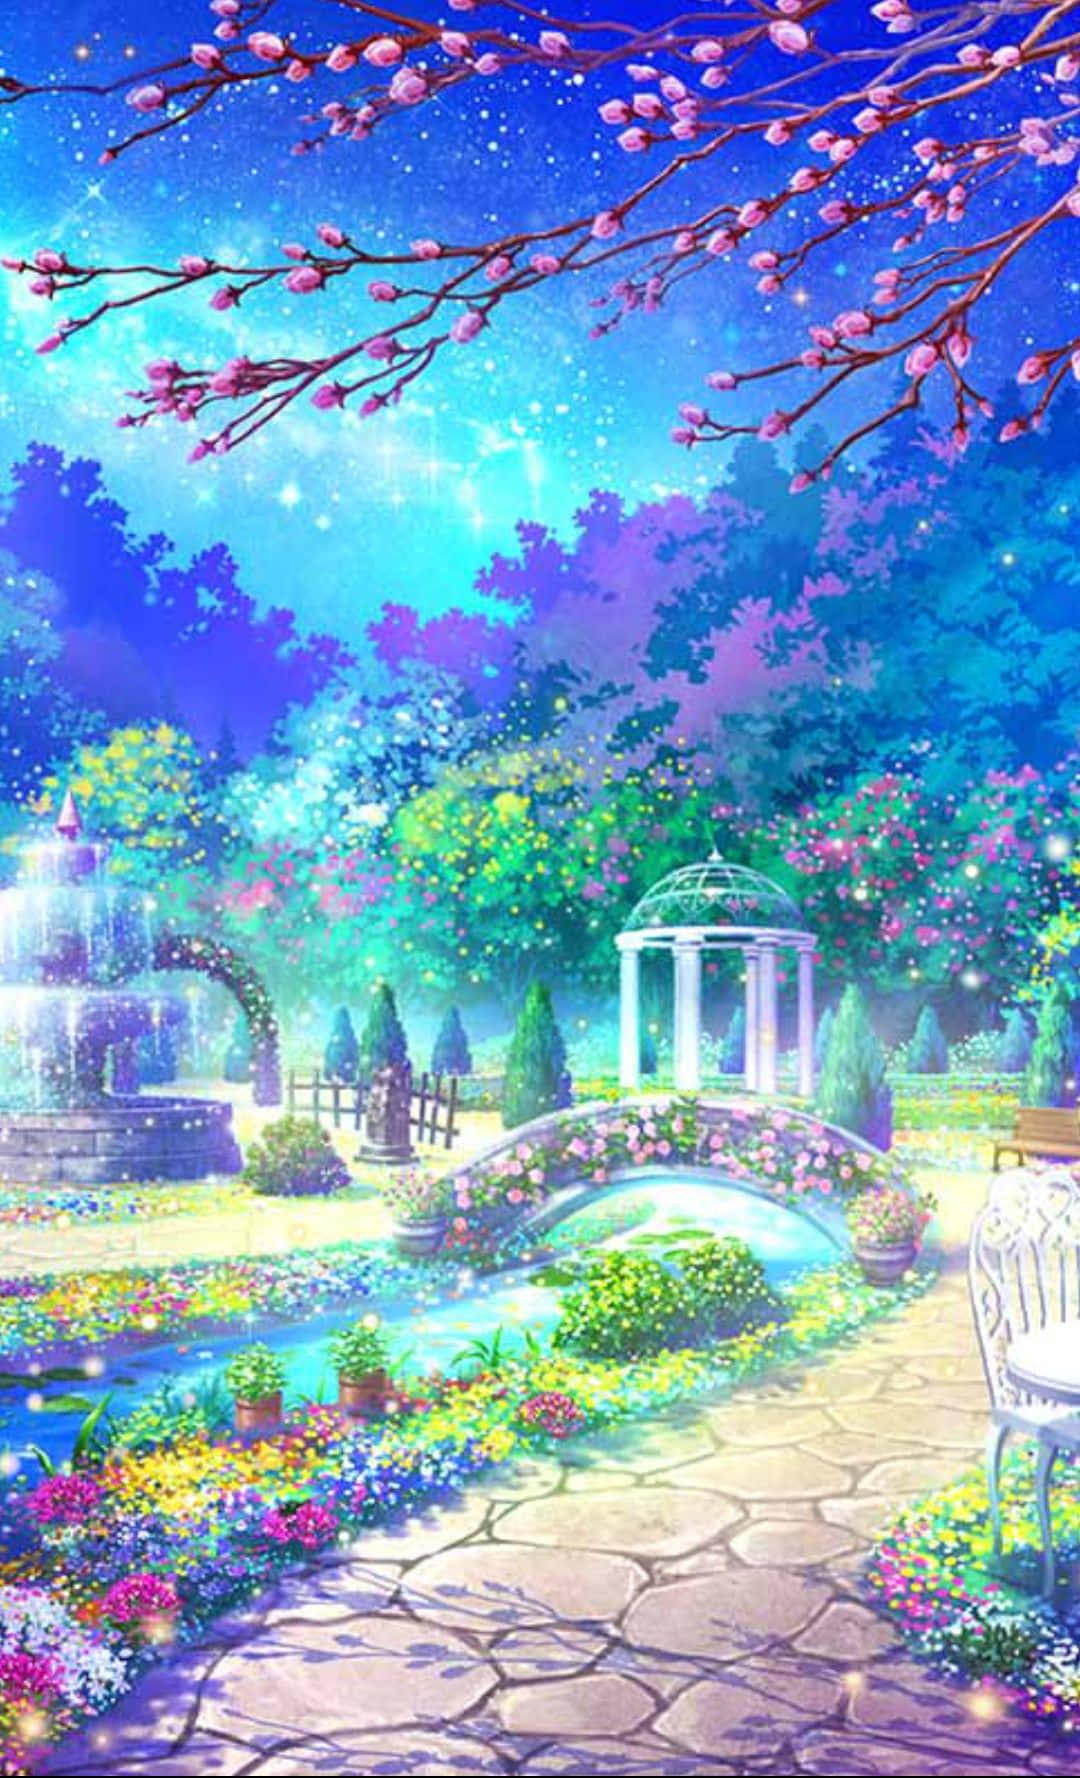 Magical Fantasy Forest with Anime Girl